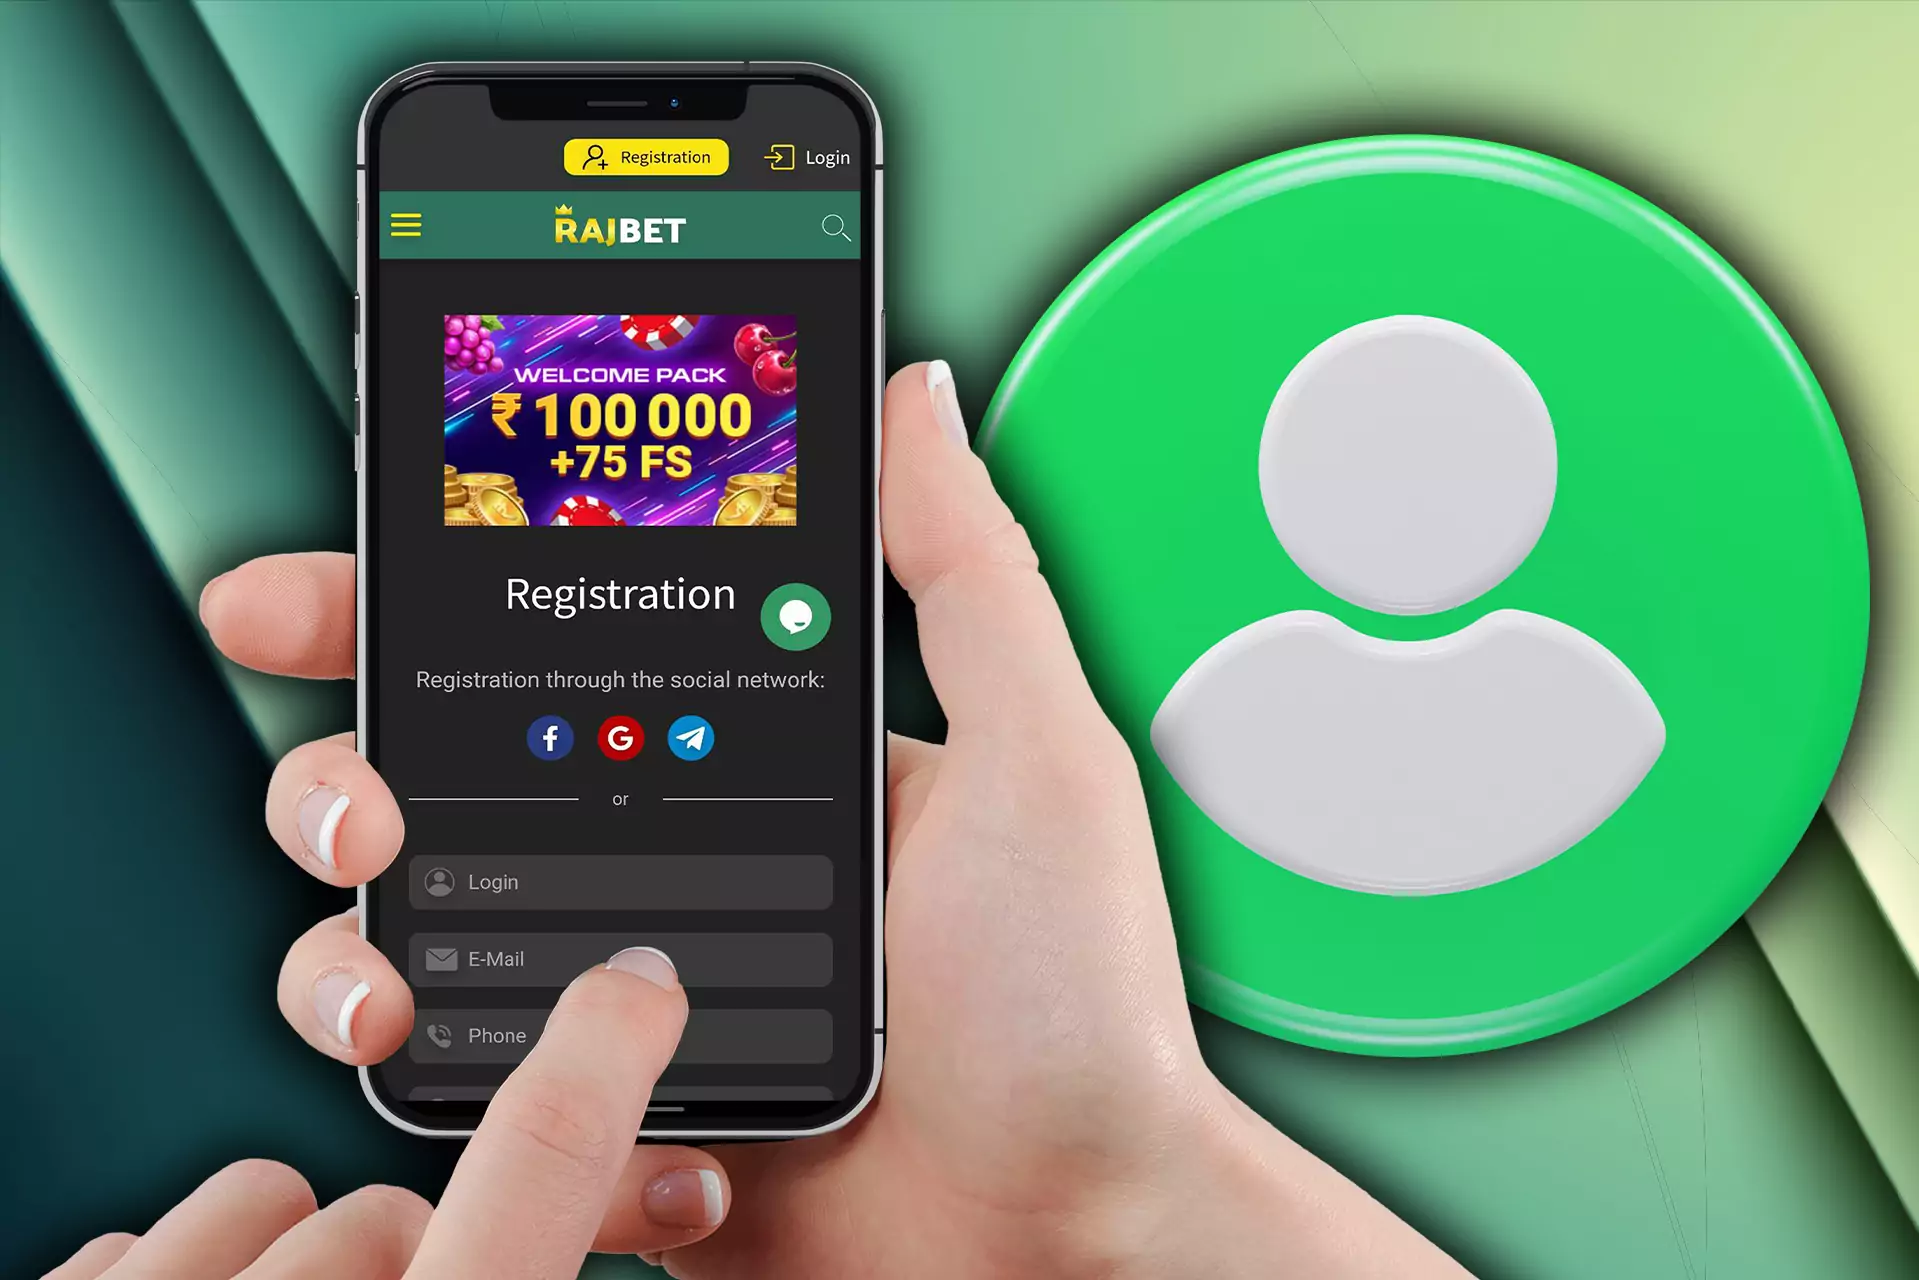 You can sign up for an account in the Rajbet app.